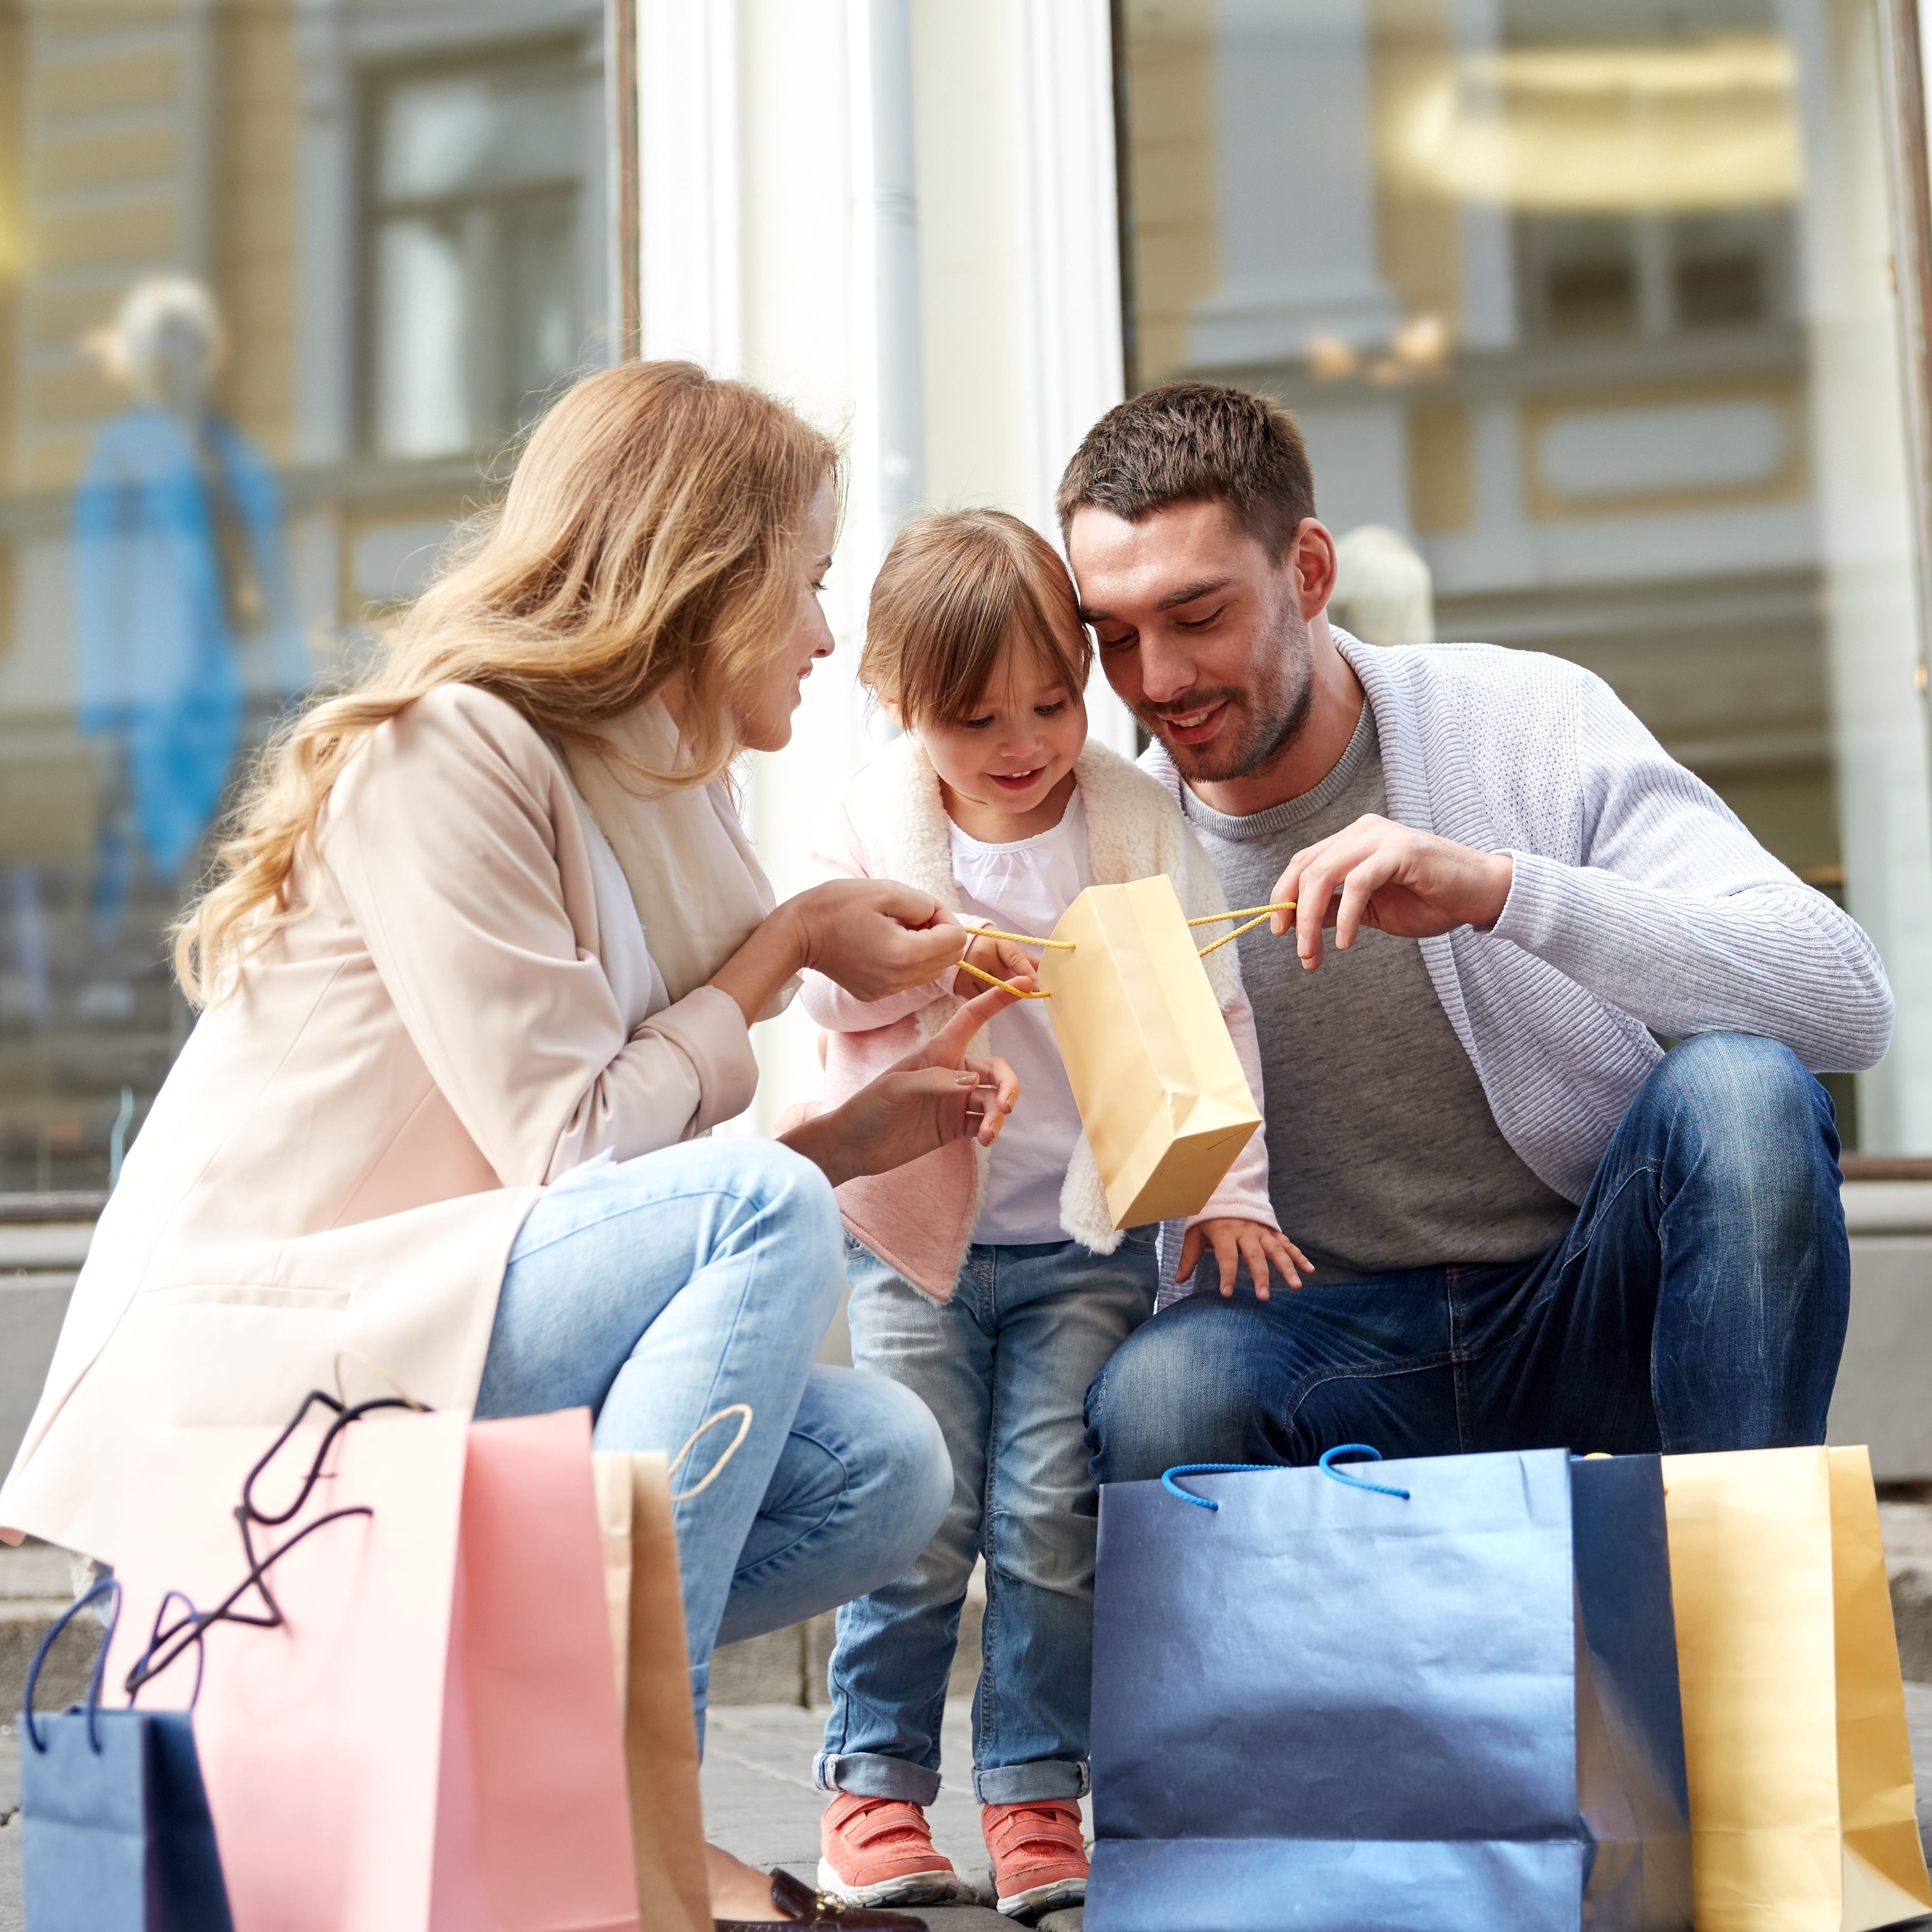 Our shopping destinations for families